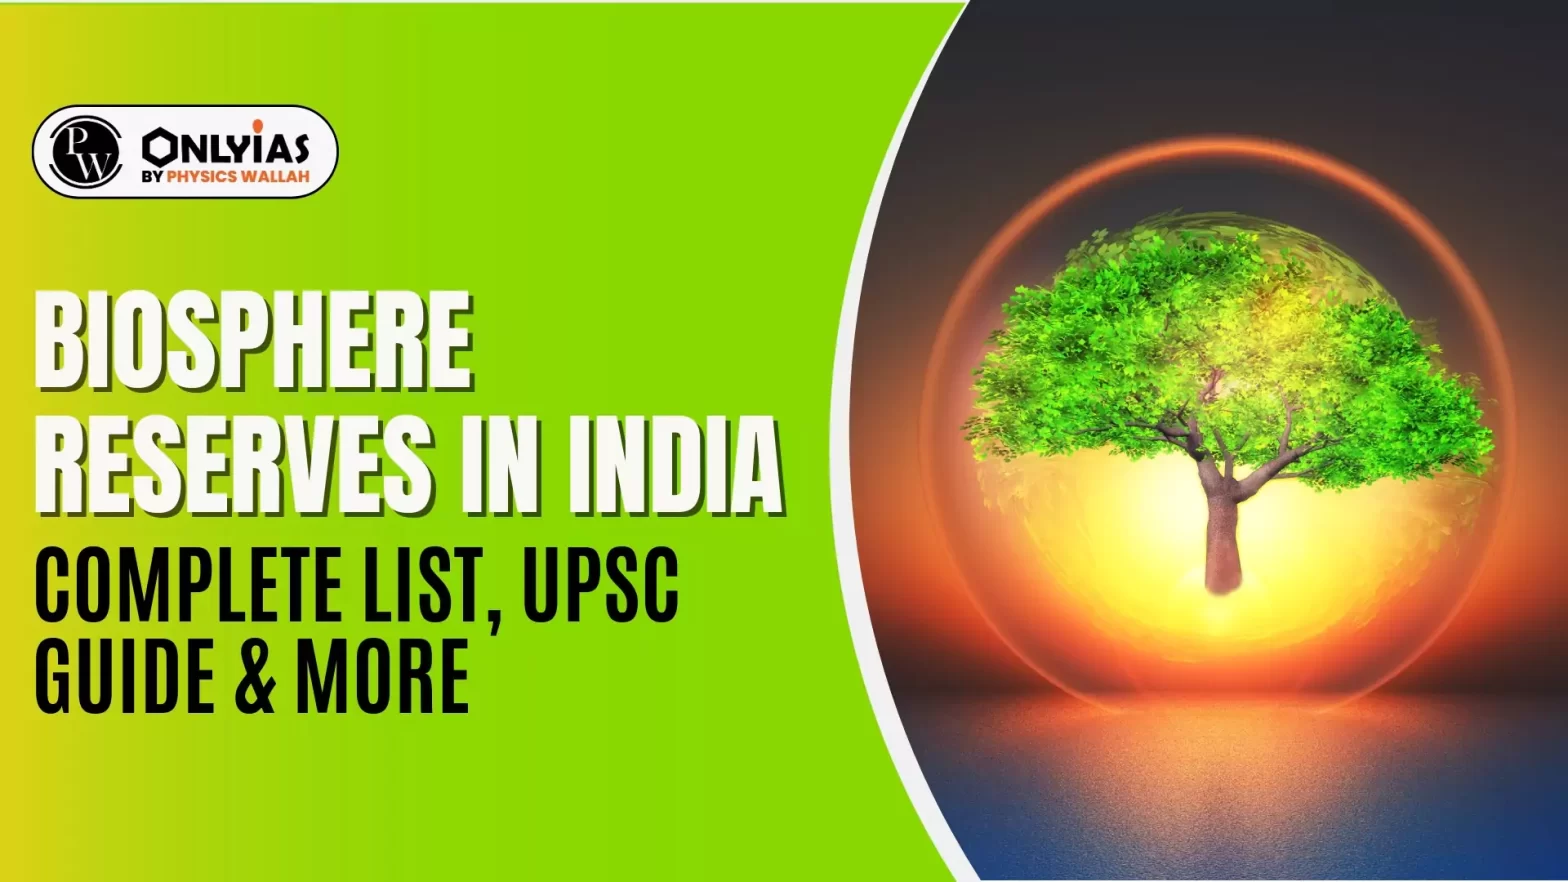 Biosphere Reserves in India: Complete List, UPSC Guide & More